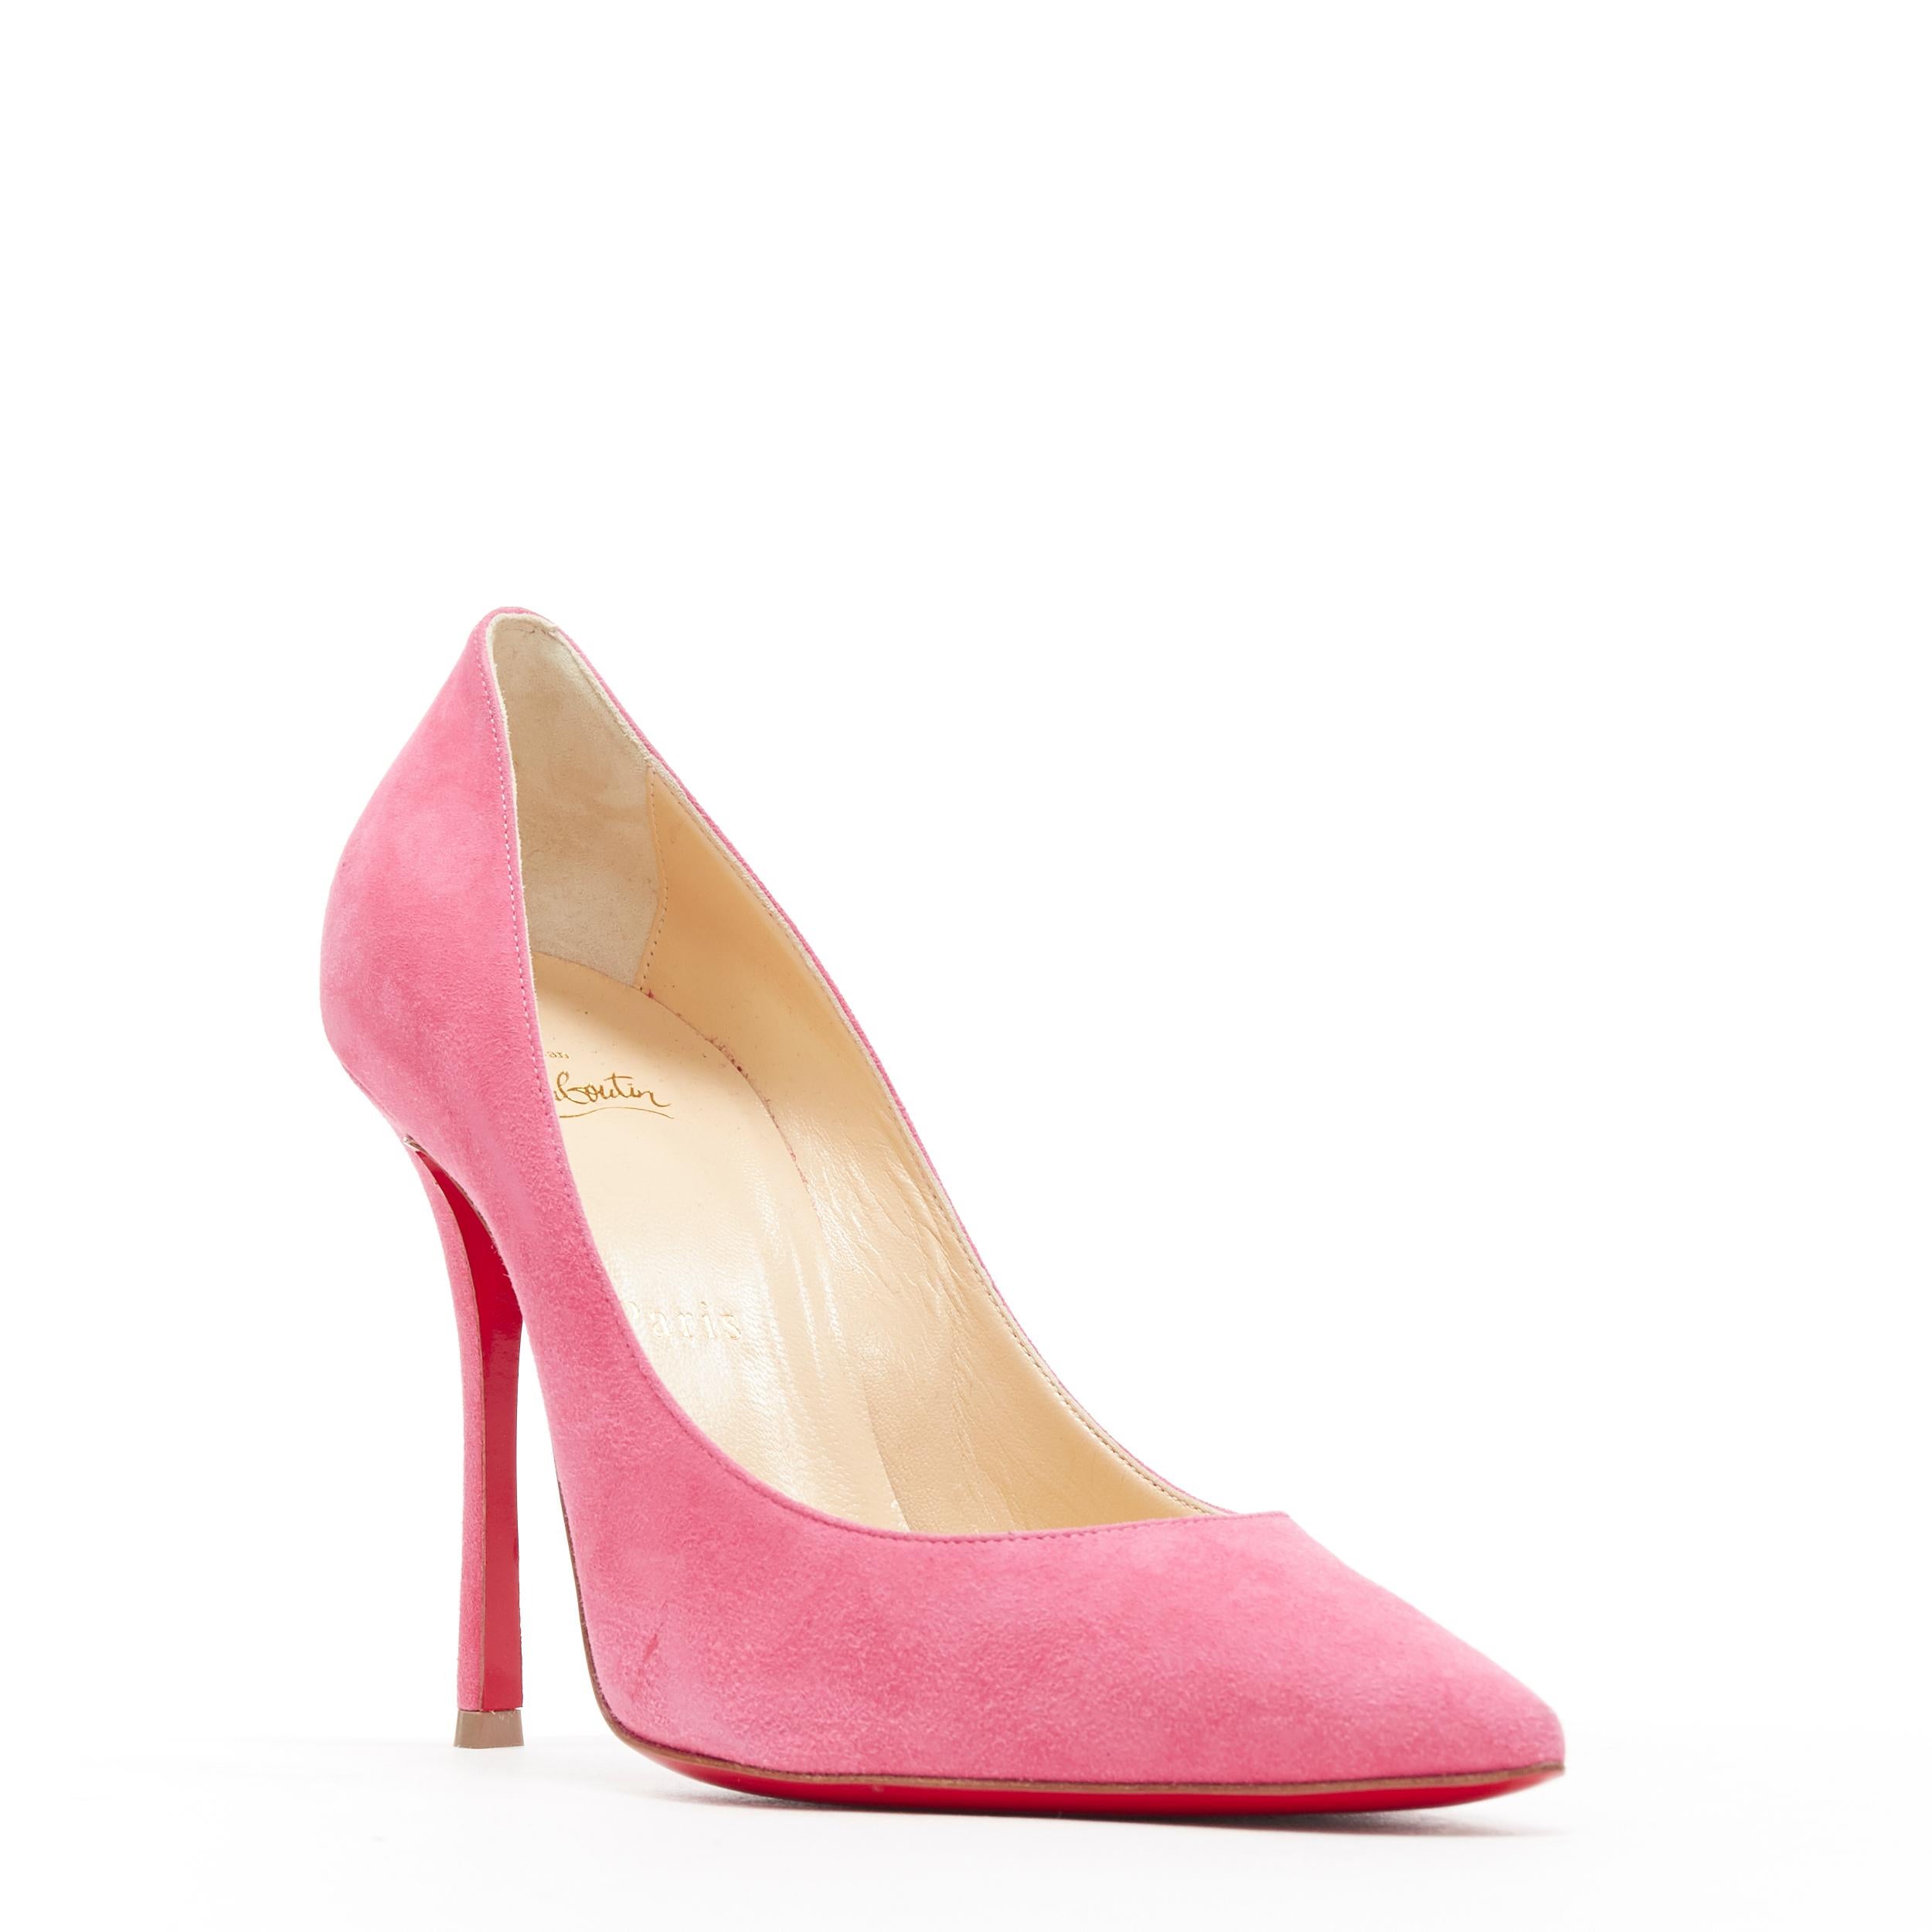 CHRISTIAN LOUBOUTIN pink suede leather pointy toe stiletto pigalle pump EU38
Brand: Christian Louboutin
Designer: Christian Louboutin
Model Name / Style: Pigalle 
Material: Suede
Color: Pink
Pattern: Solid
Extra Detail: High (3-3.9 in) heel height.